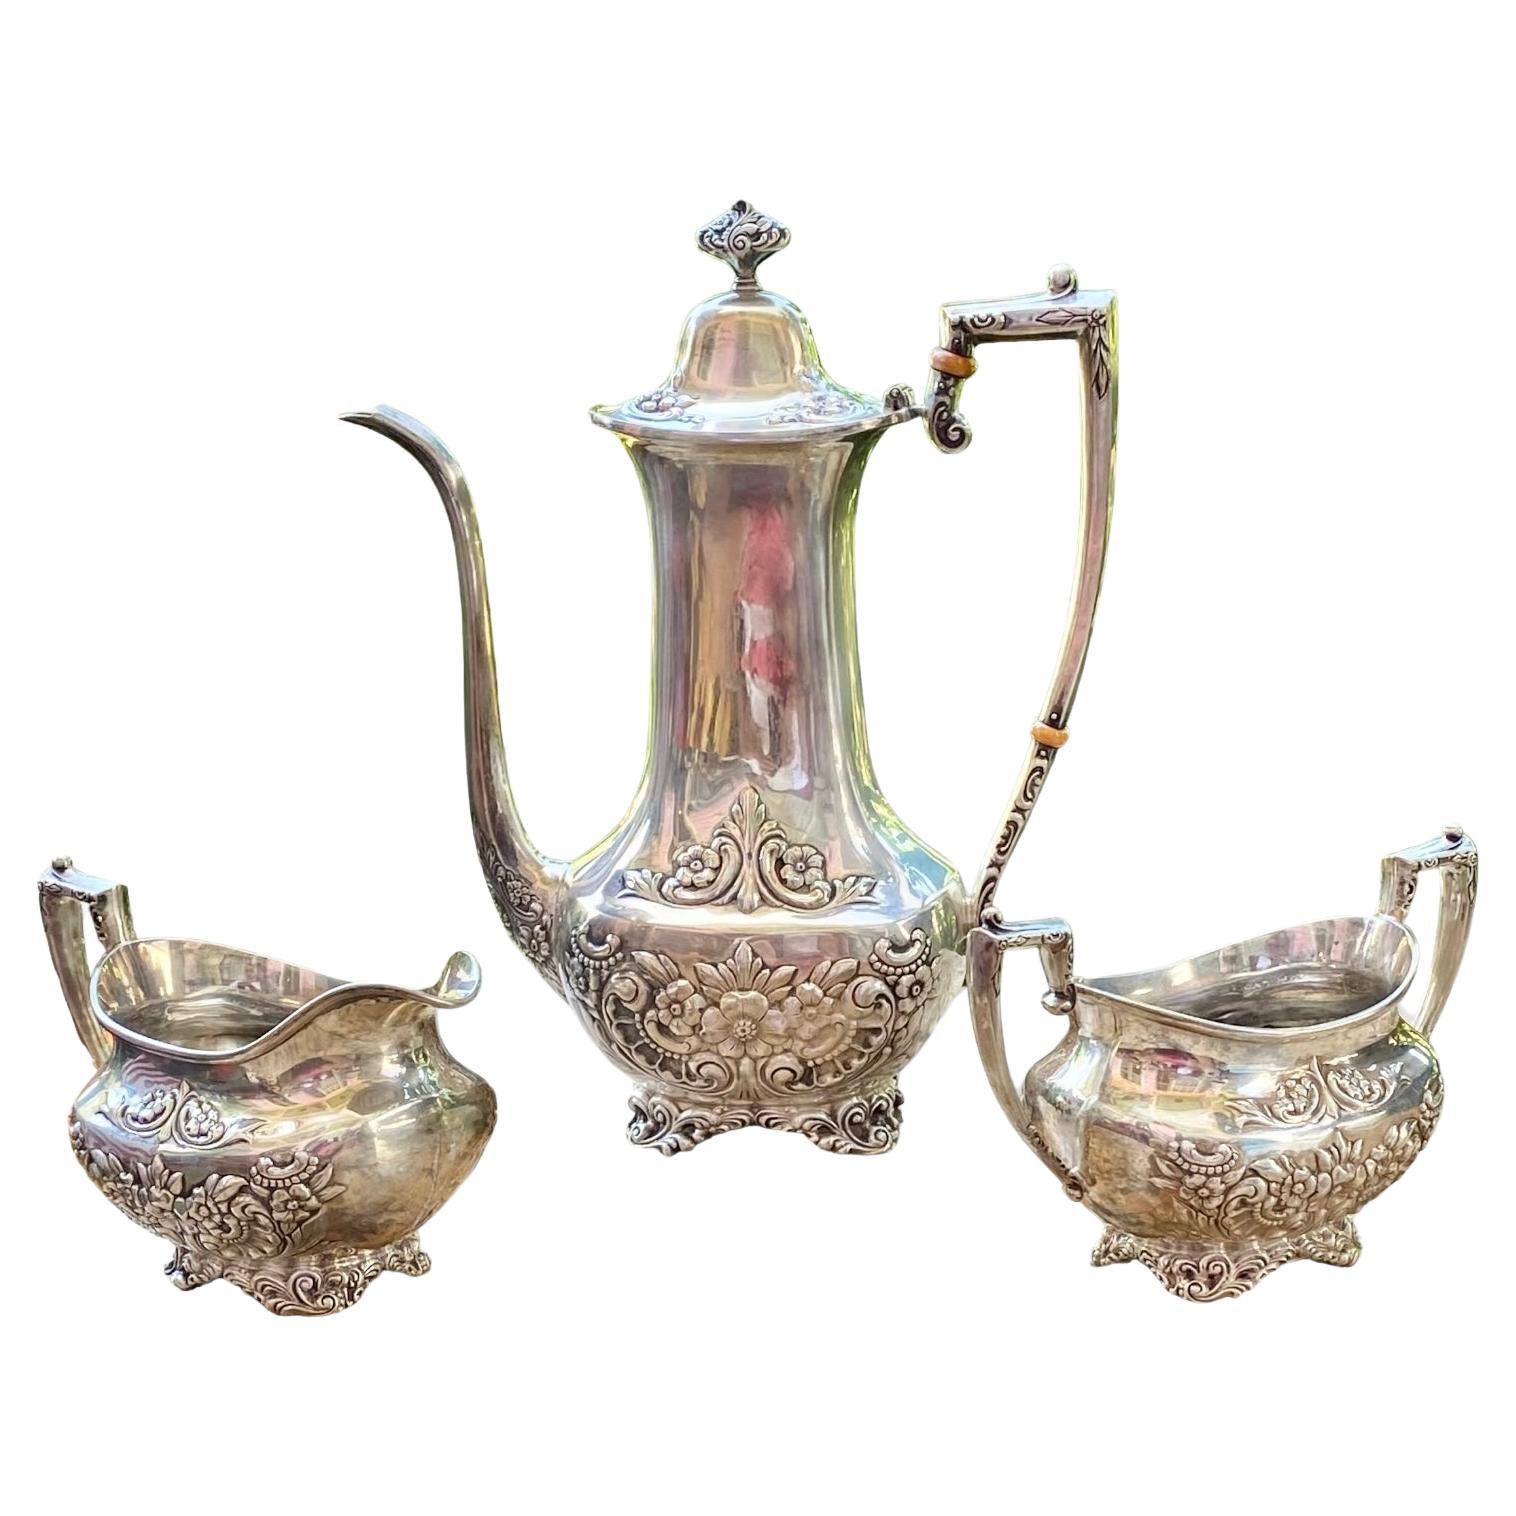 Botticelli Pattern After-Dinner Coffee Set Sterling FRANK WHITING For Sale